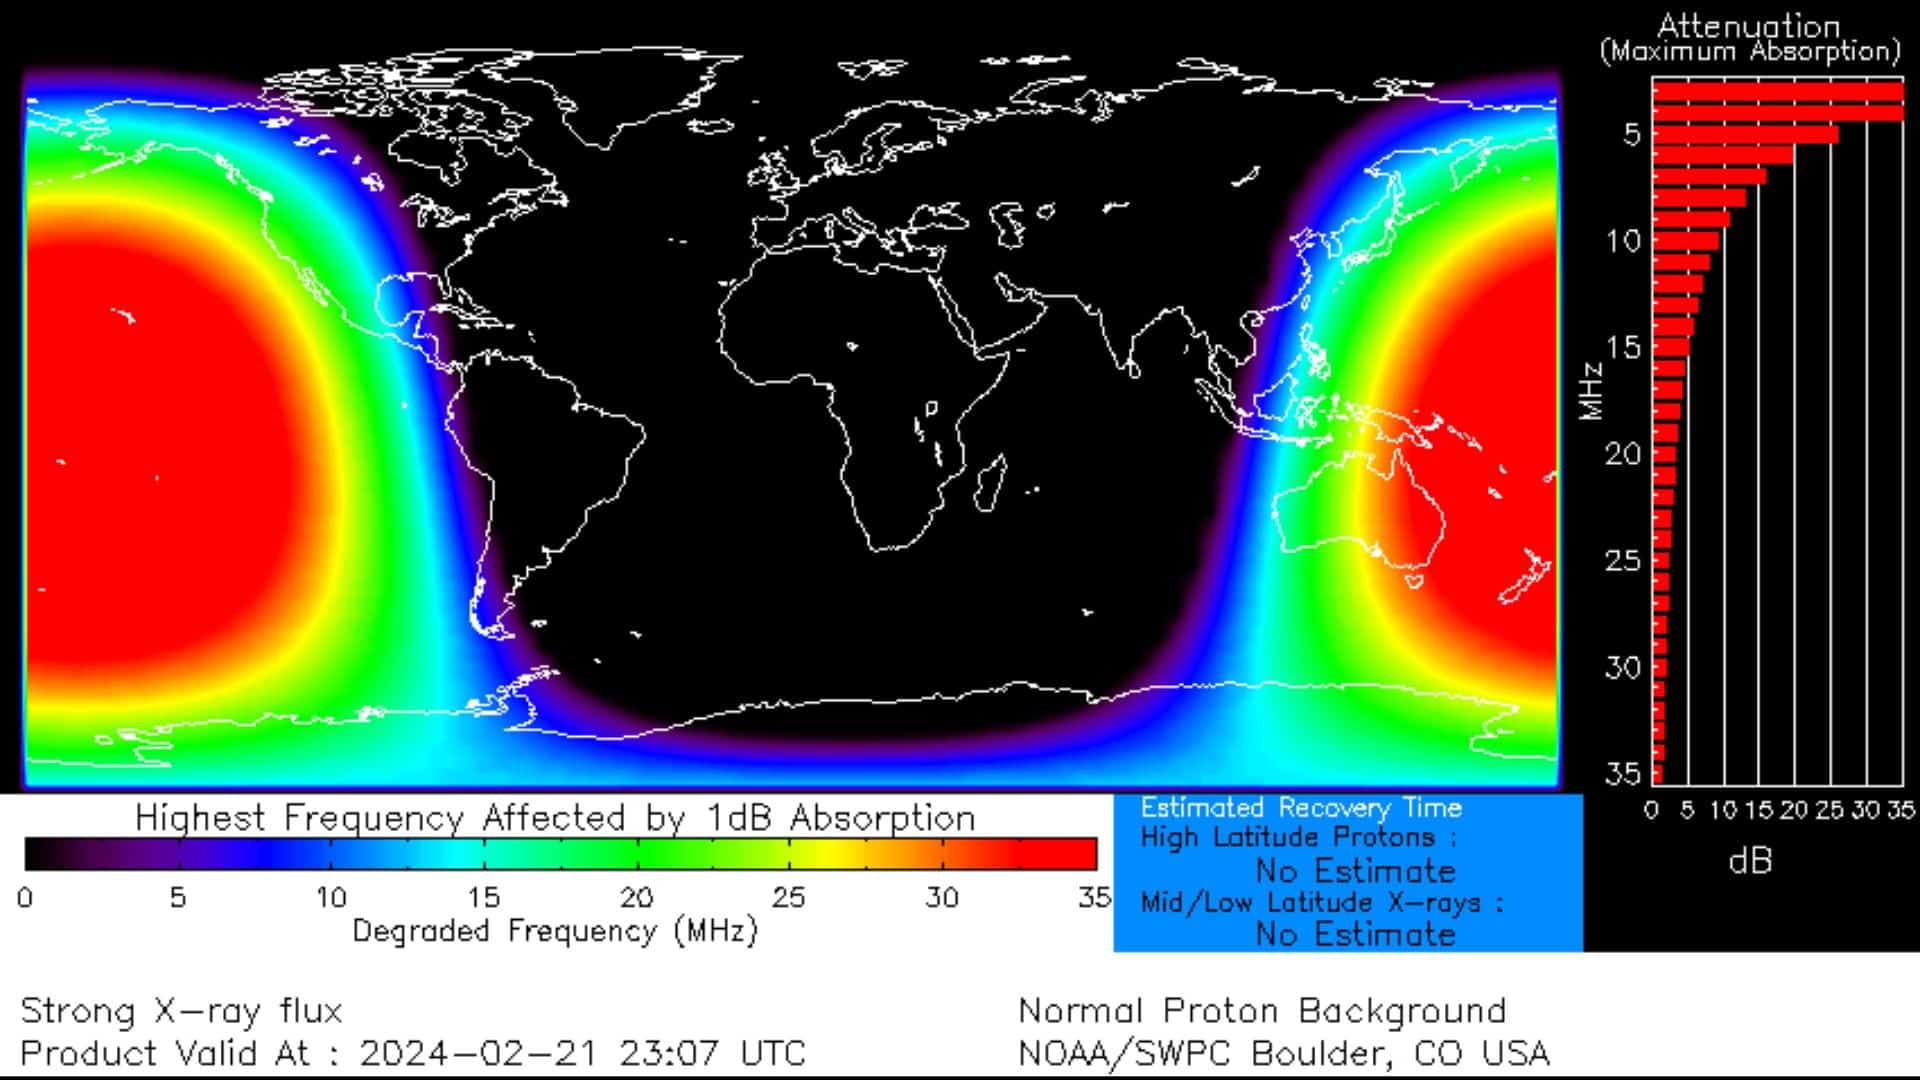 Affected areas due to strong X-flare on February 21, 2024